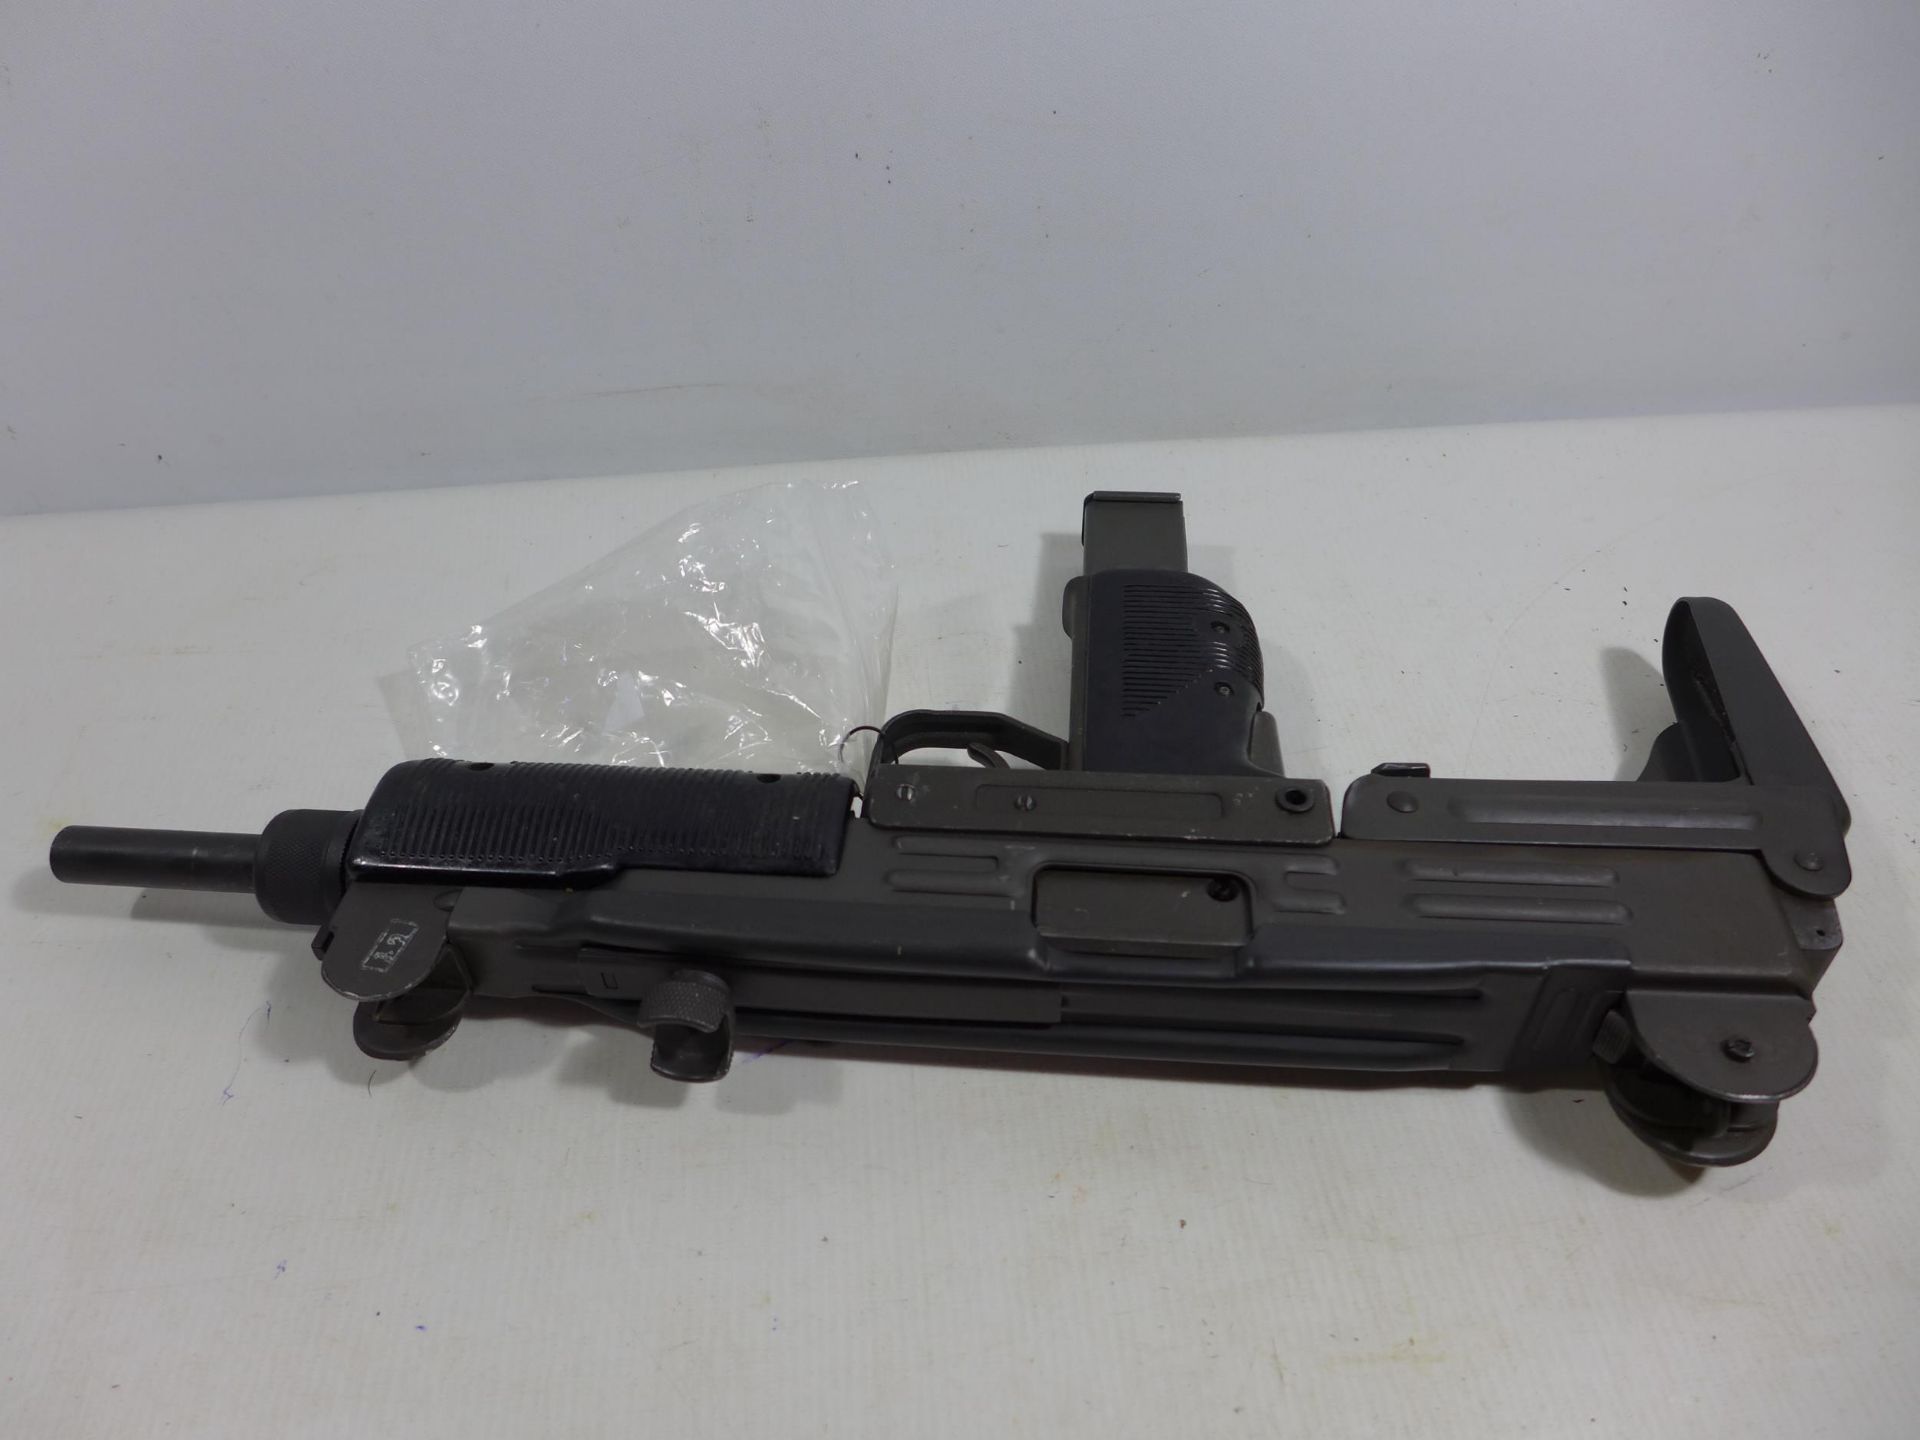 A DEACTIVATED UZI 9MM SUB MACHINE GUN, WITH FOLDING STOCK, 26CM BARREL, LENGTH 65CM, SERIAL NUMBER - Image 7 of 7